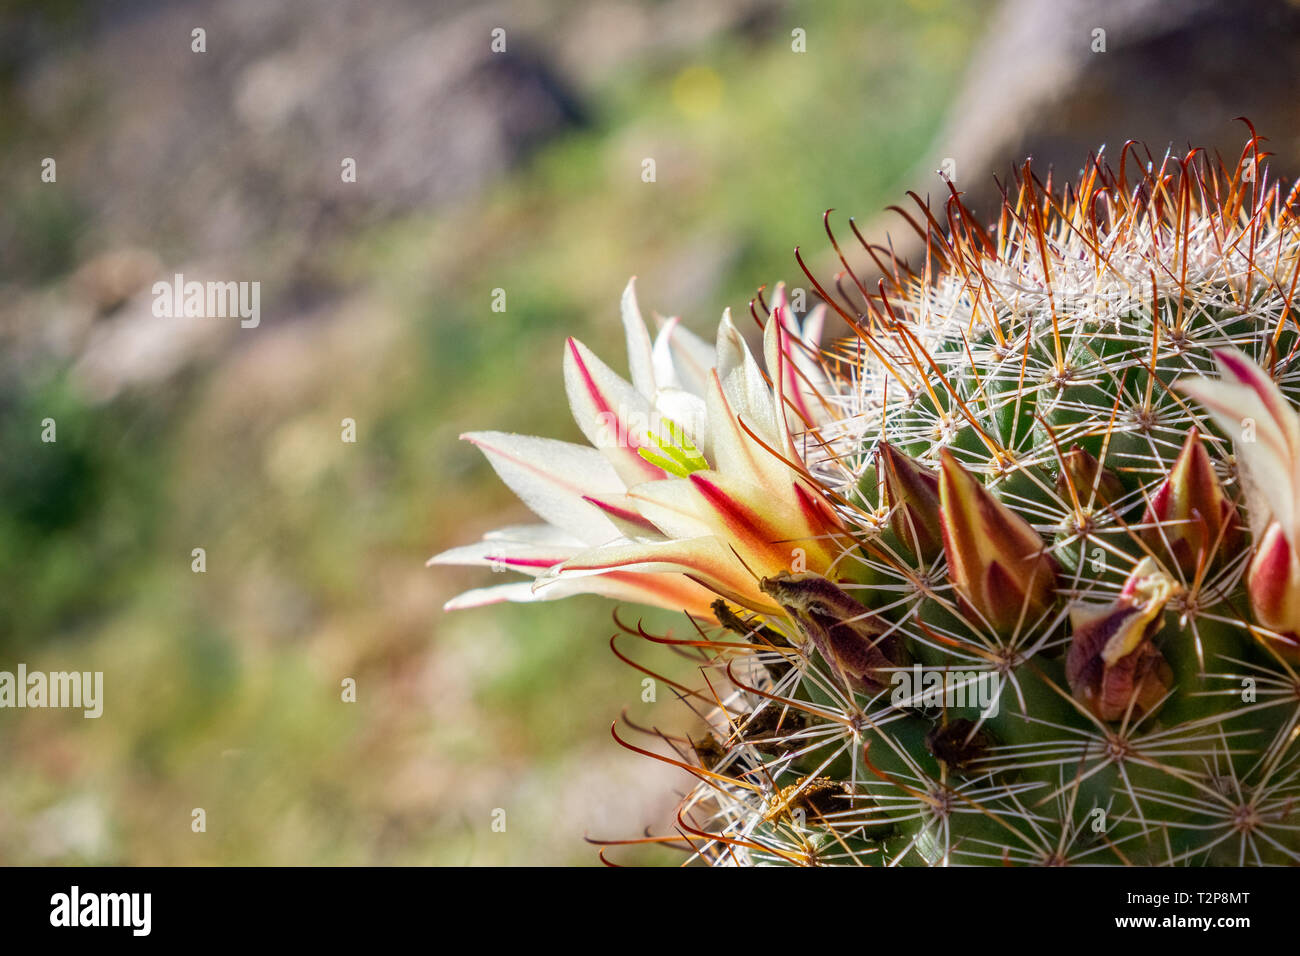 https://c8.alamy.com/comp/T2P8MT/mammillaria-dioica-also-called-the-strawberry-cactus-california-fishhook-cactus-strawberry-pincushion-or-fishhook-cactus-blooming-in-anza-borrego-T2P8MT.jpg